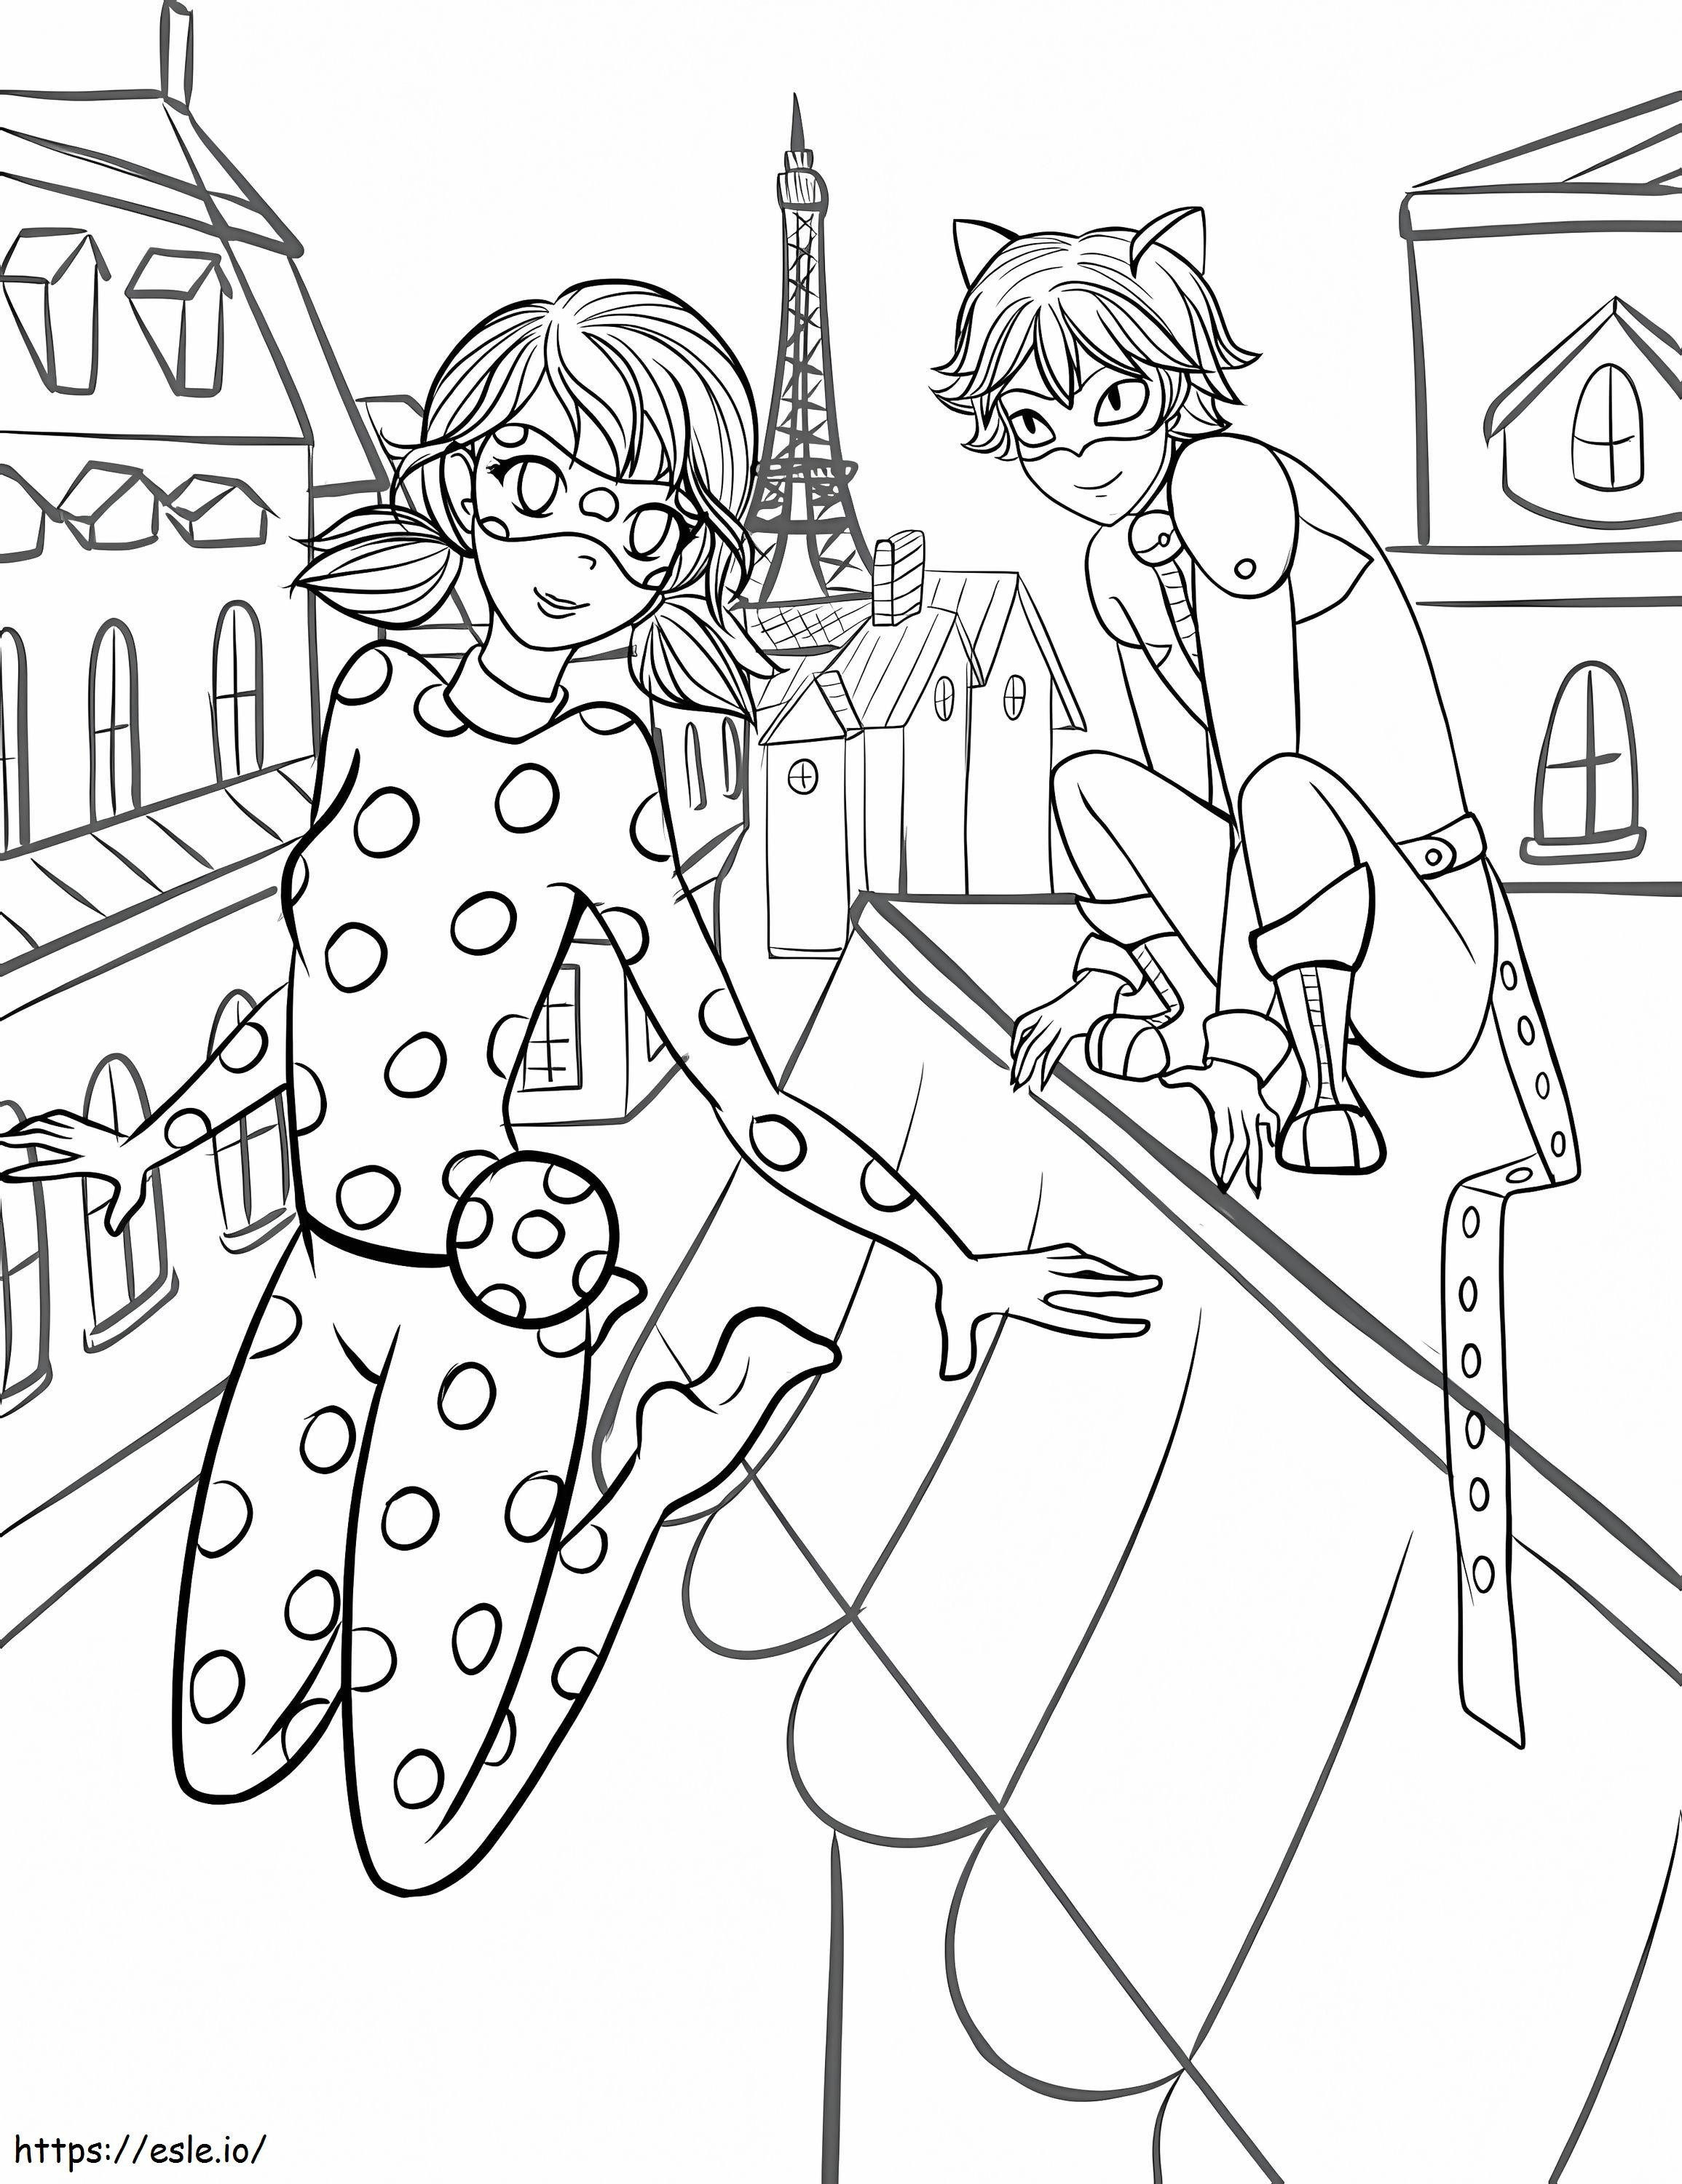 Ladybug With Cat Noir coloring page